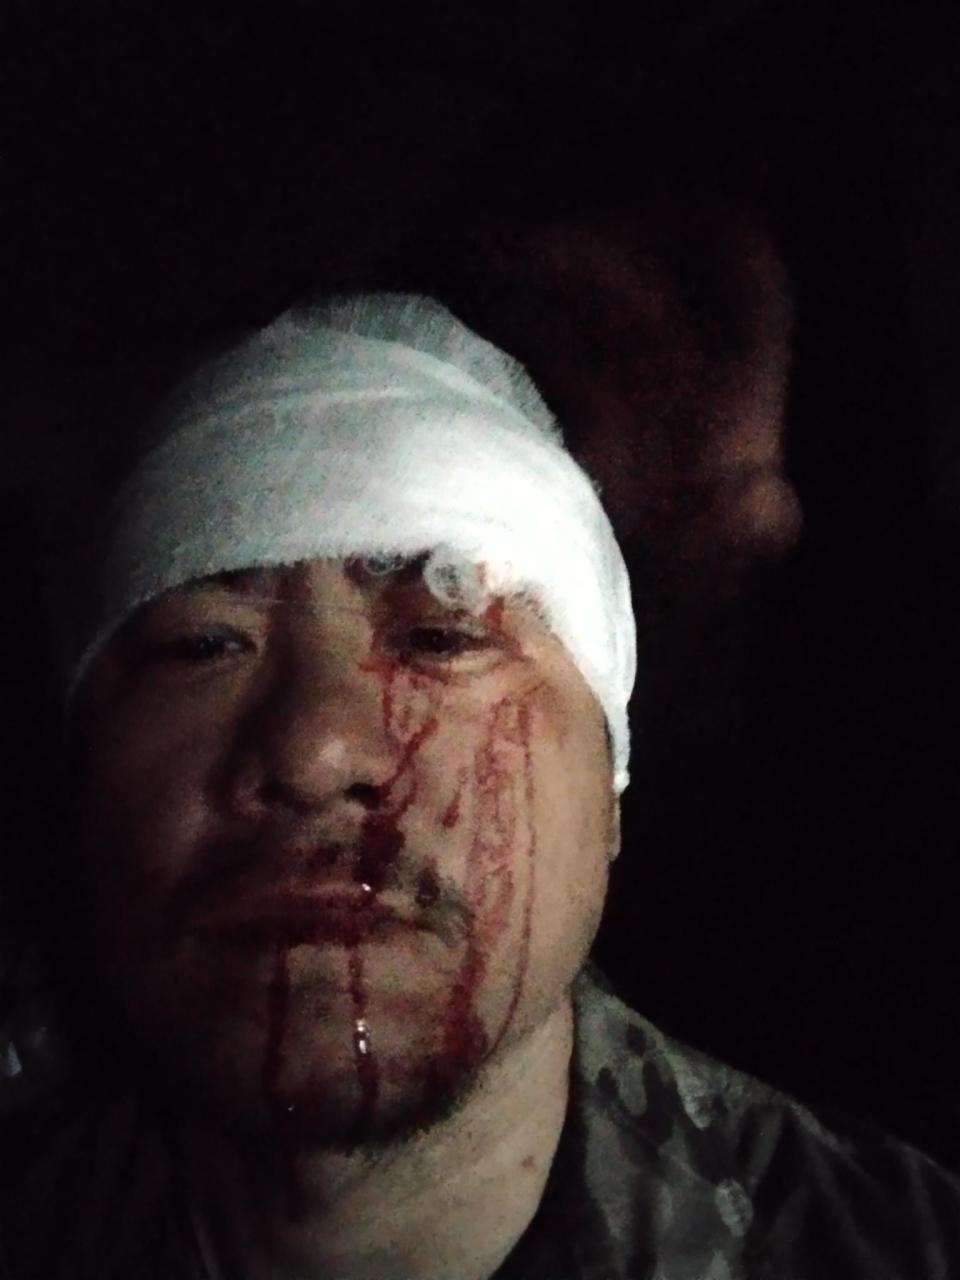 Jackie wearing a bandage over his head with blood on his face